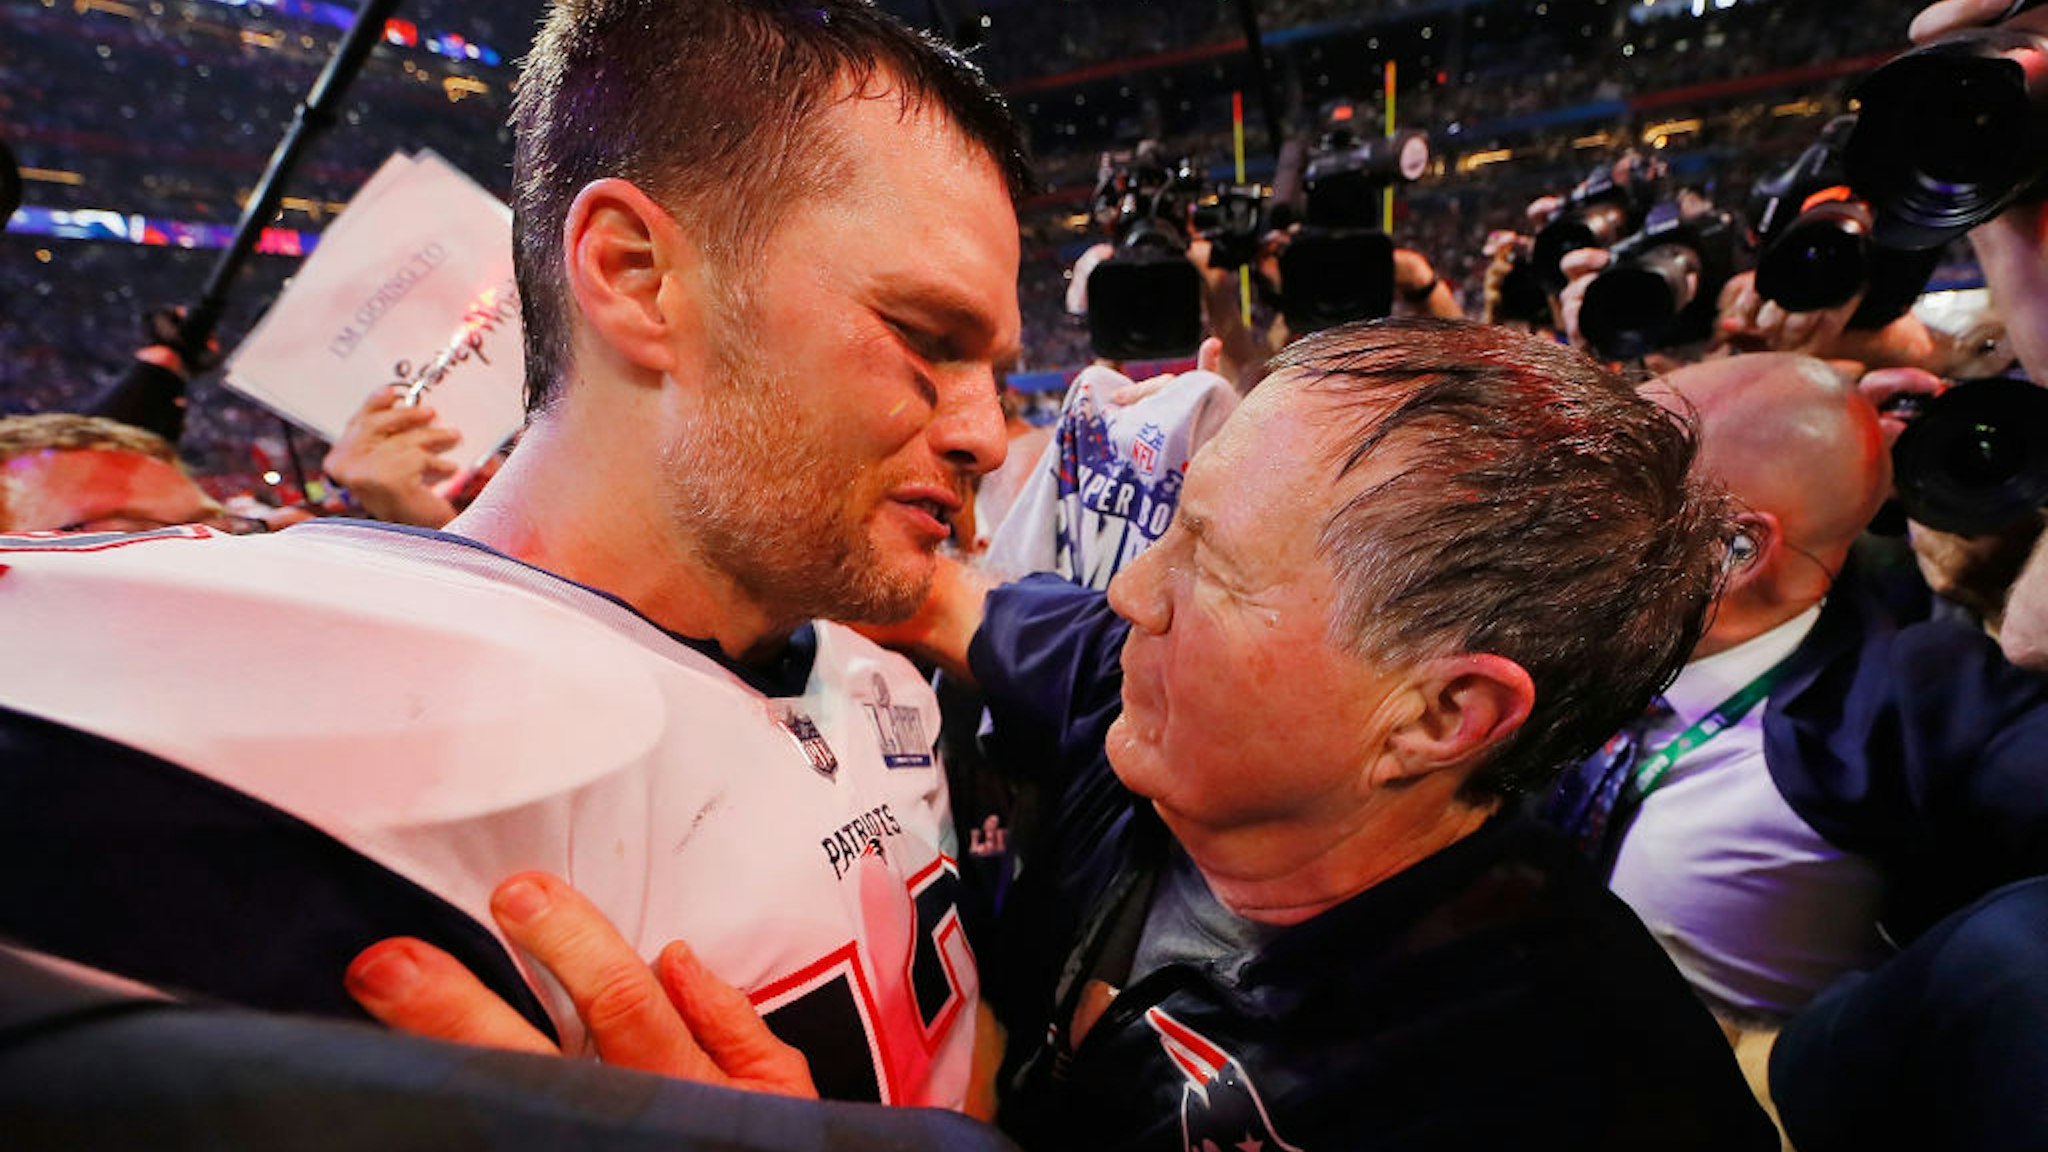 Tom Brady #12 of the New England Patriots talks to head coach Bill Belichick of the New England Patriots after the Patriots defeat the Rams 13-3 during Super Bowl LIII at Mercedes-Benz Stadium on February 3, 2019 in Atlanta, Georgia.